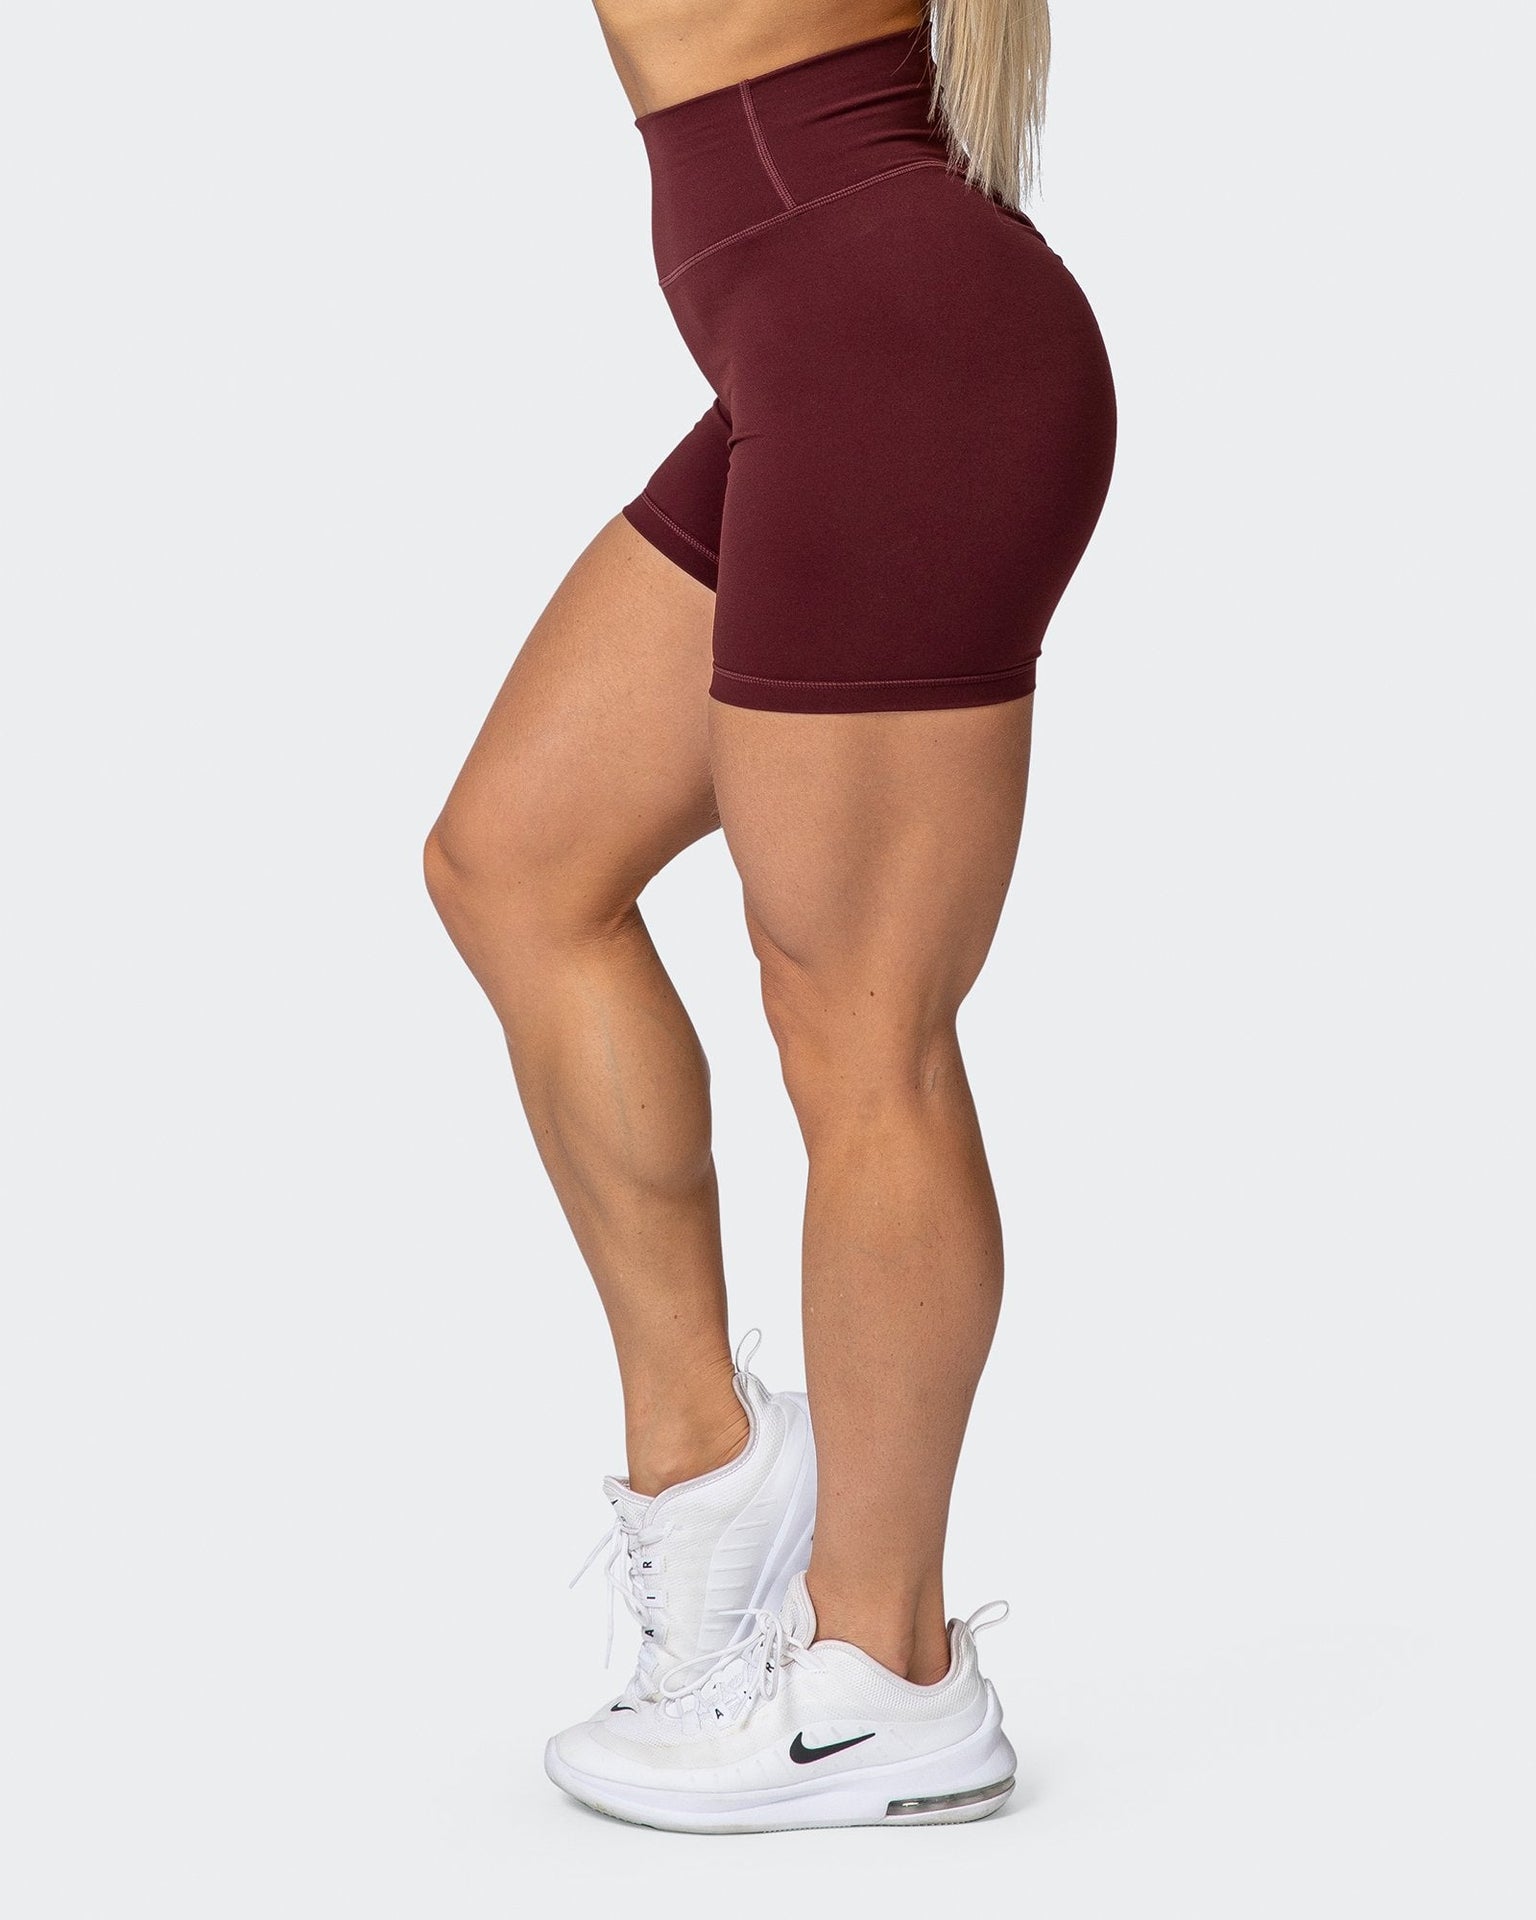 Scrunch Butt Biker Shorts! WORTH IT OR NOT?! review by a